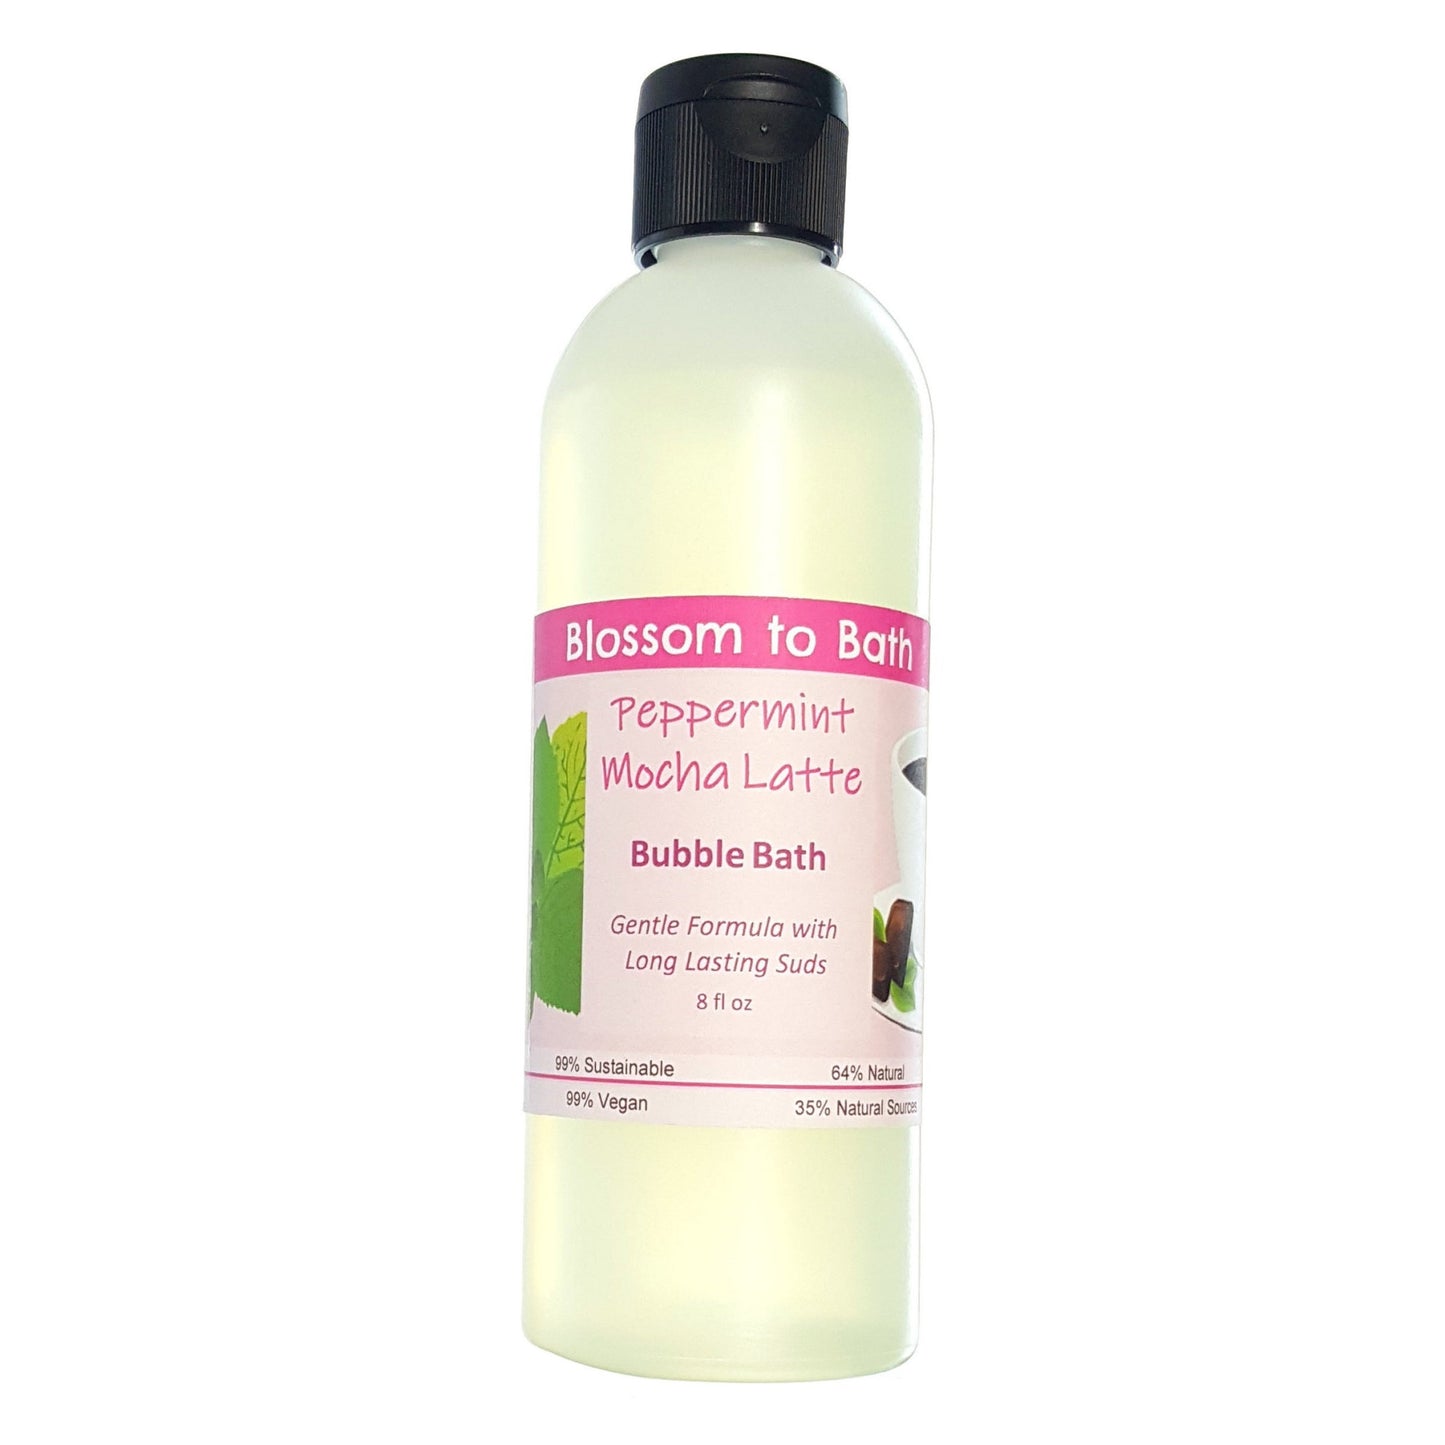 Buy Blossom to Bath Peppermint Mocha Latte Bubble Bath from Flowersong Soap Studio.  Lively, long lasting  bubbles in a gentle plant based formula for maximum relaxation time  A confectionary blend of fresh mint, rich fudge, and coffee.